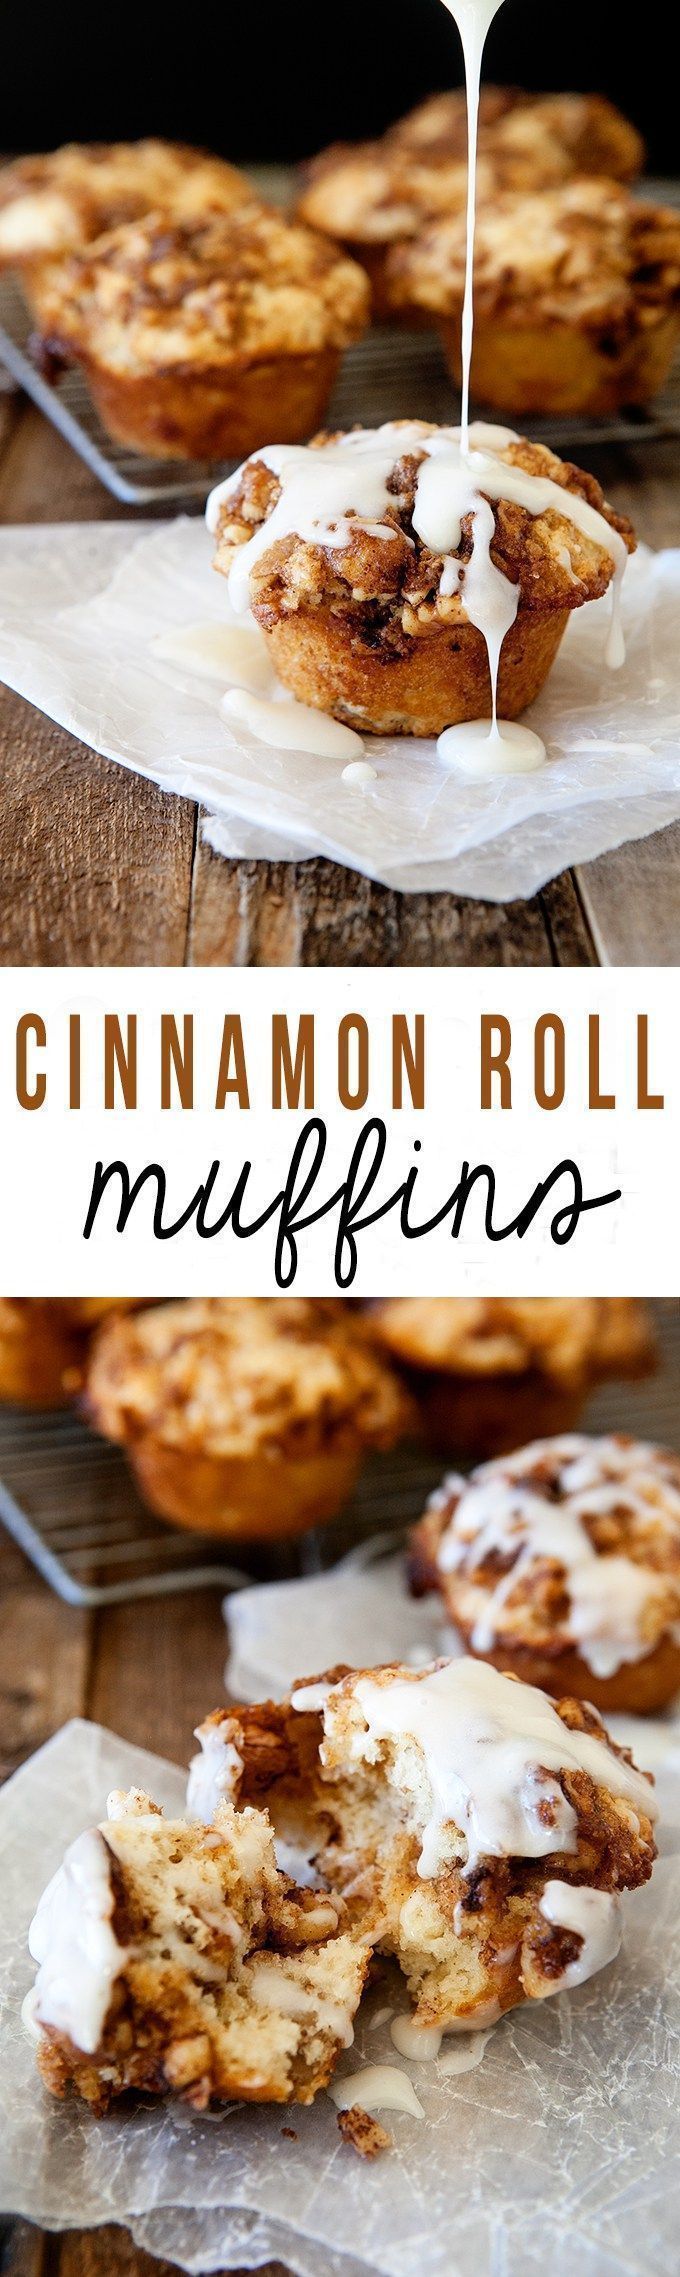 Cinnamon Roll Muffins – Easier than a cinnamon roll but with the same delicious flavor!